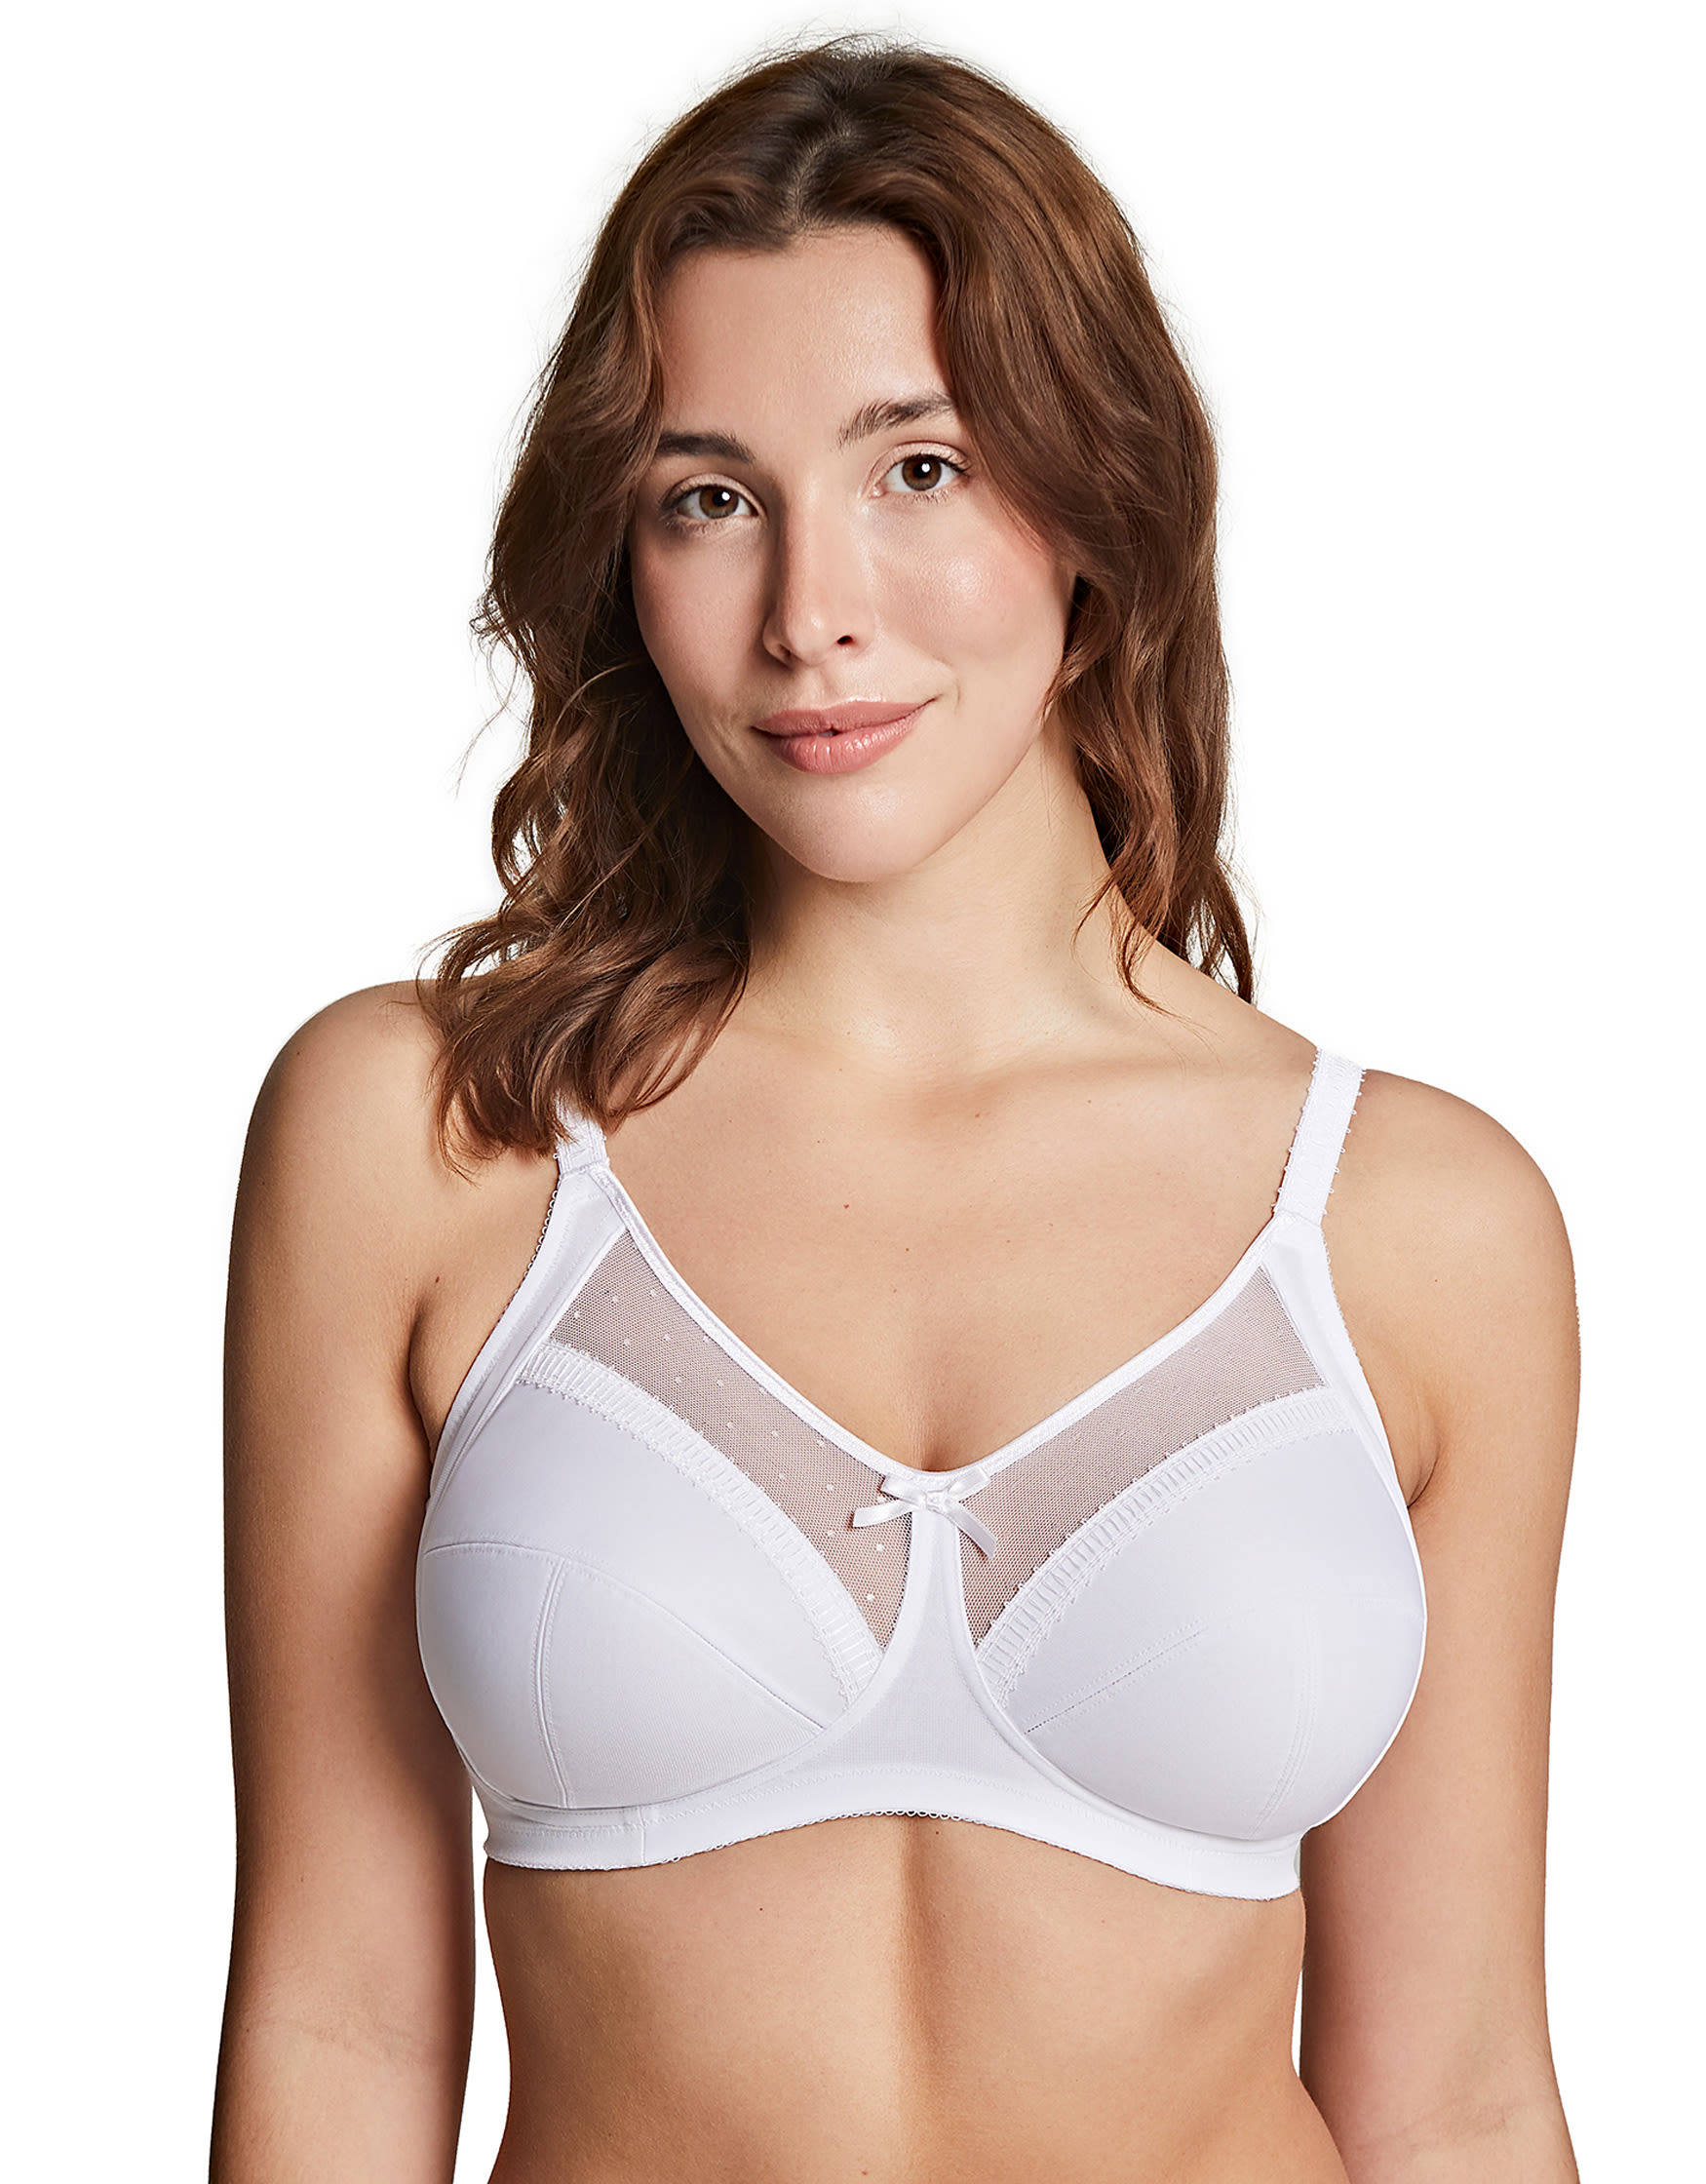 Royce Blossom Non Wired Bra, Black at John Lewis & Partners